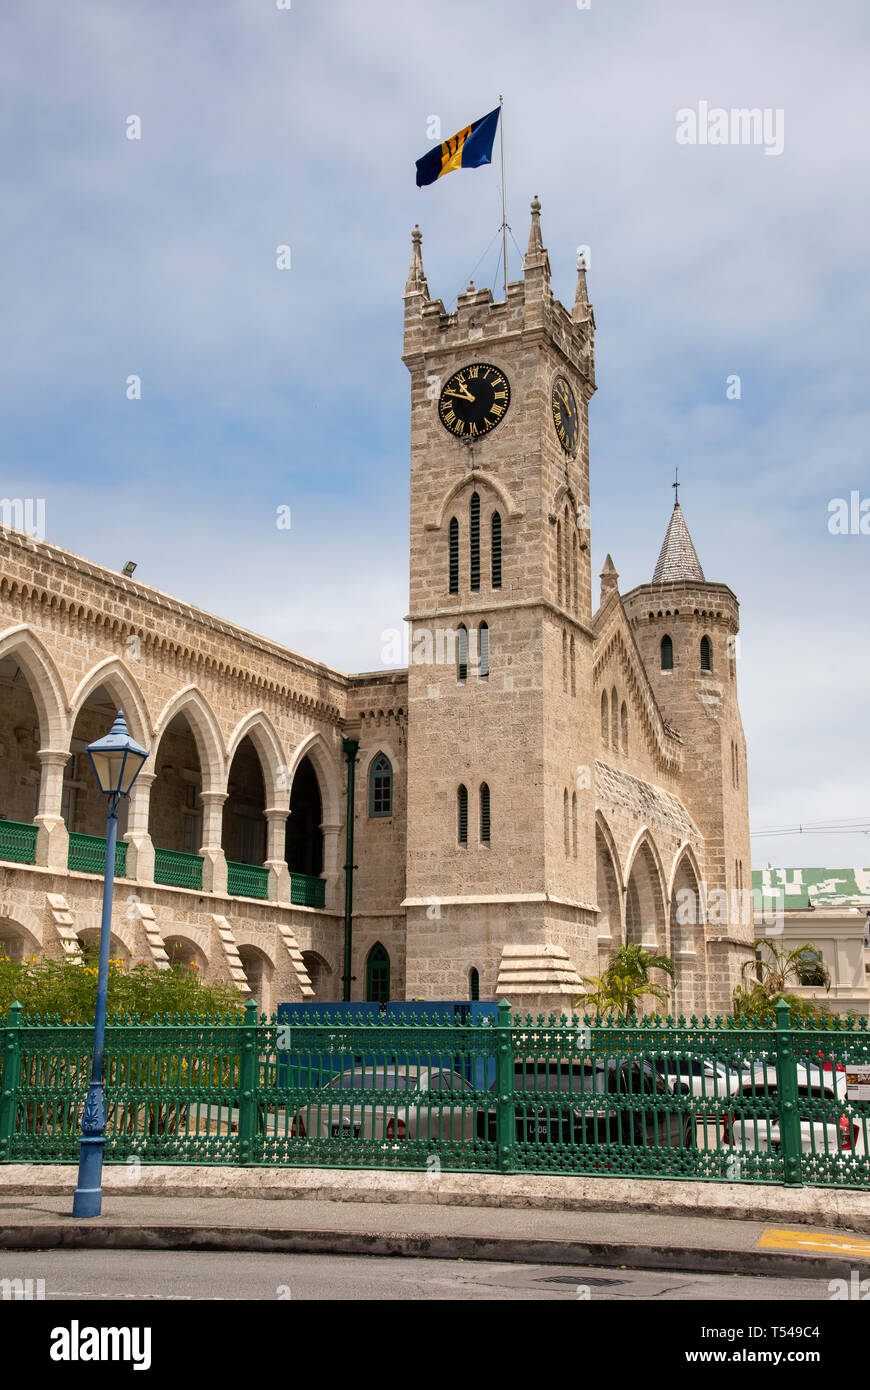 The Clock Tower of the Parliament Buildings in Bridgetown, Barbados Stock Photo